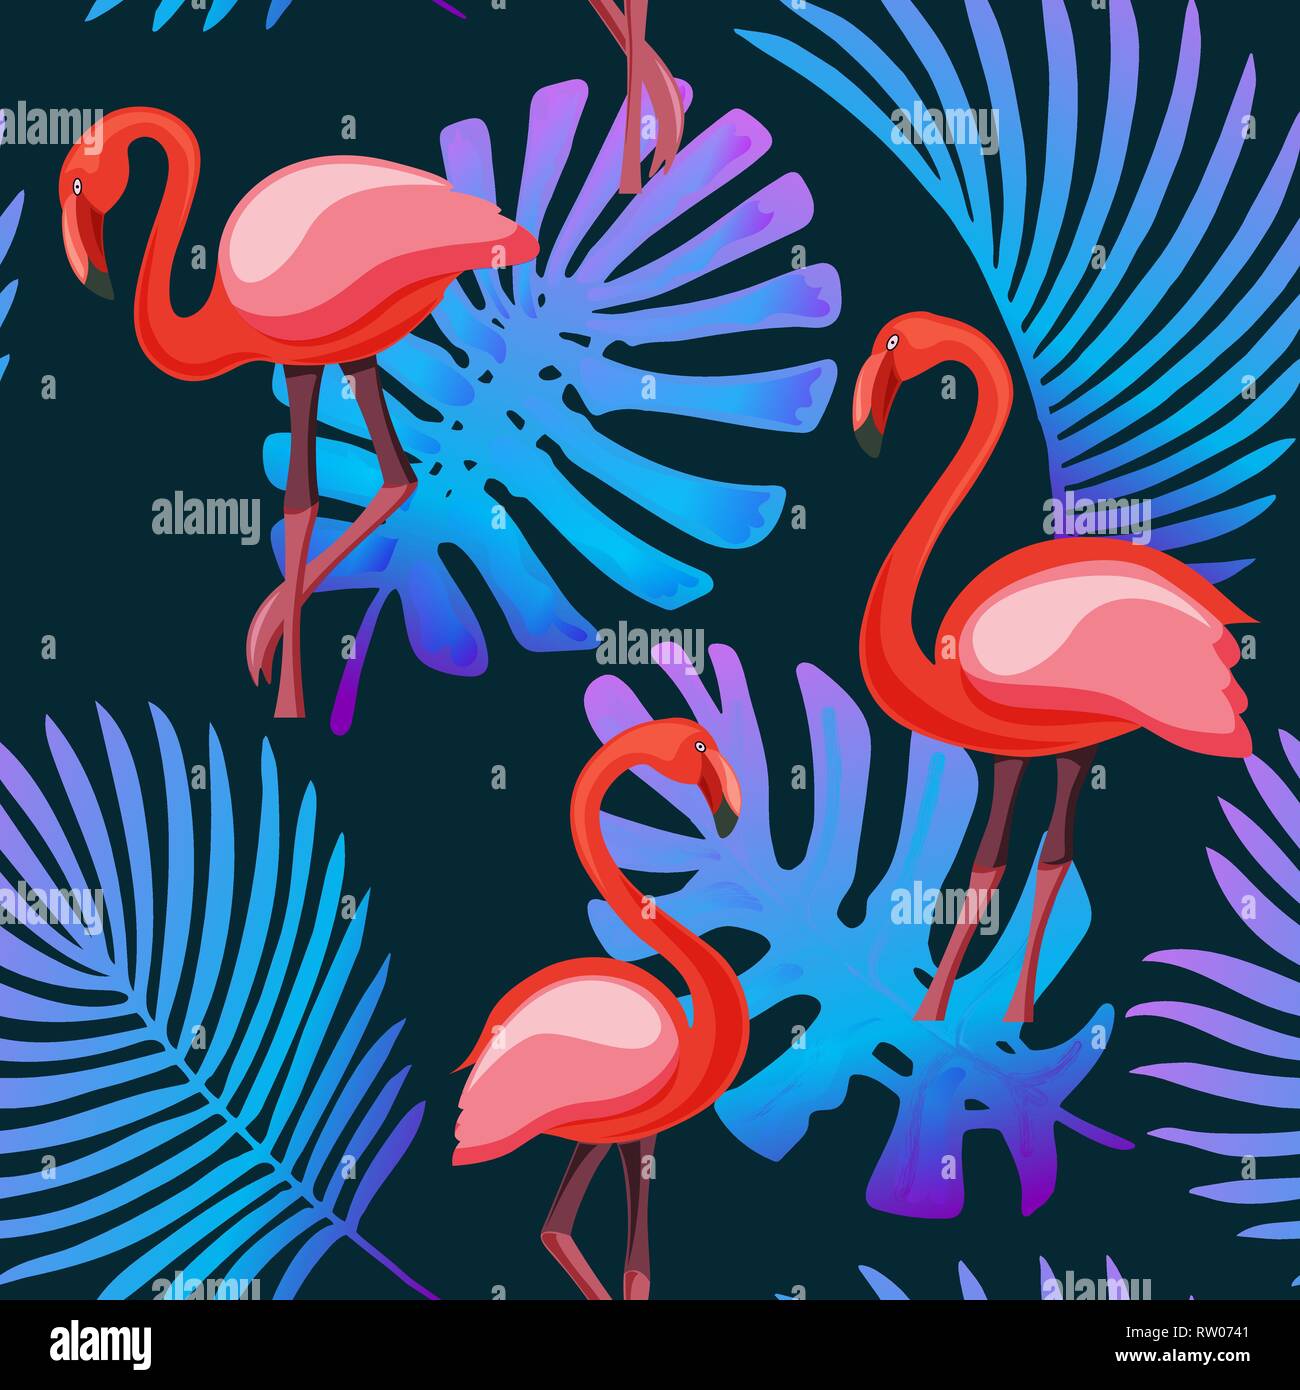 Flamingo, tropical plants neon fluorescent colors seamless pattern background Stock Vector